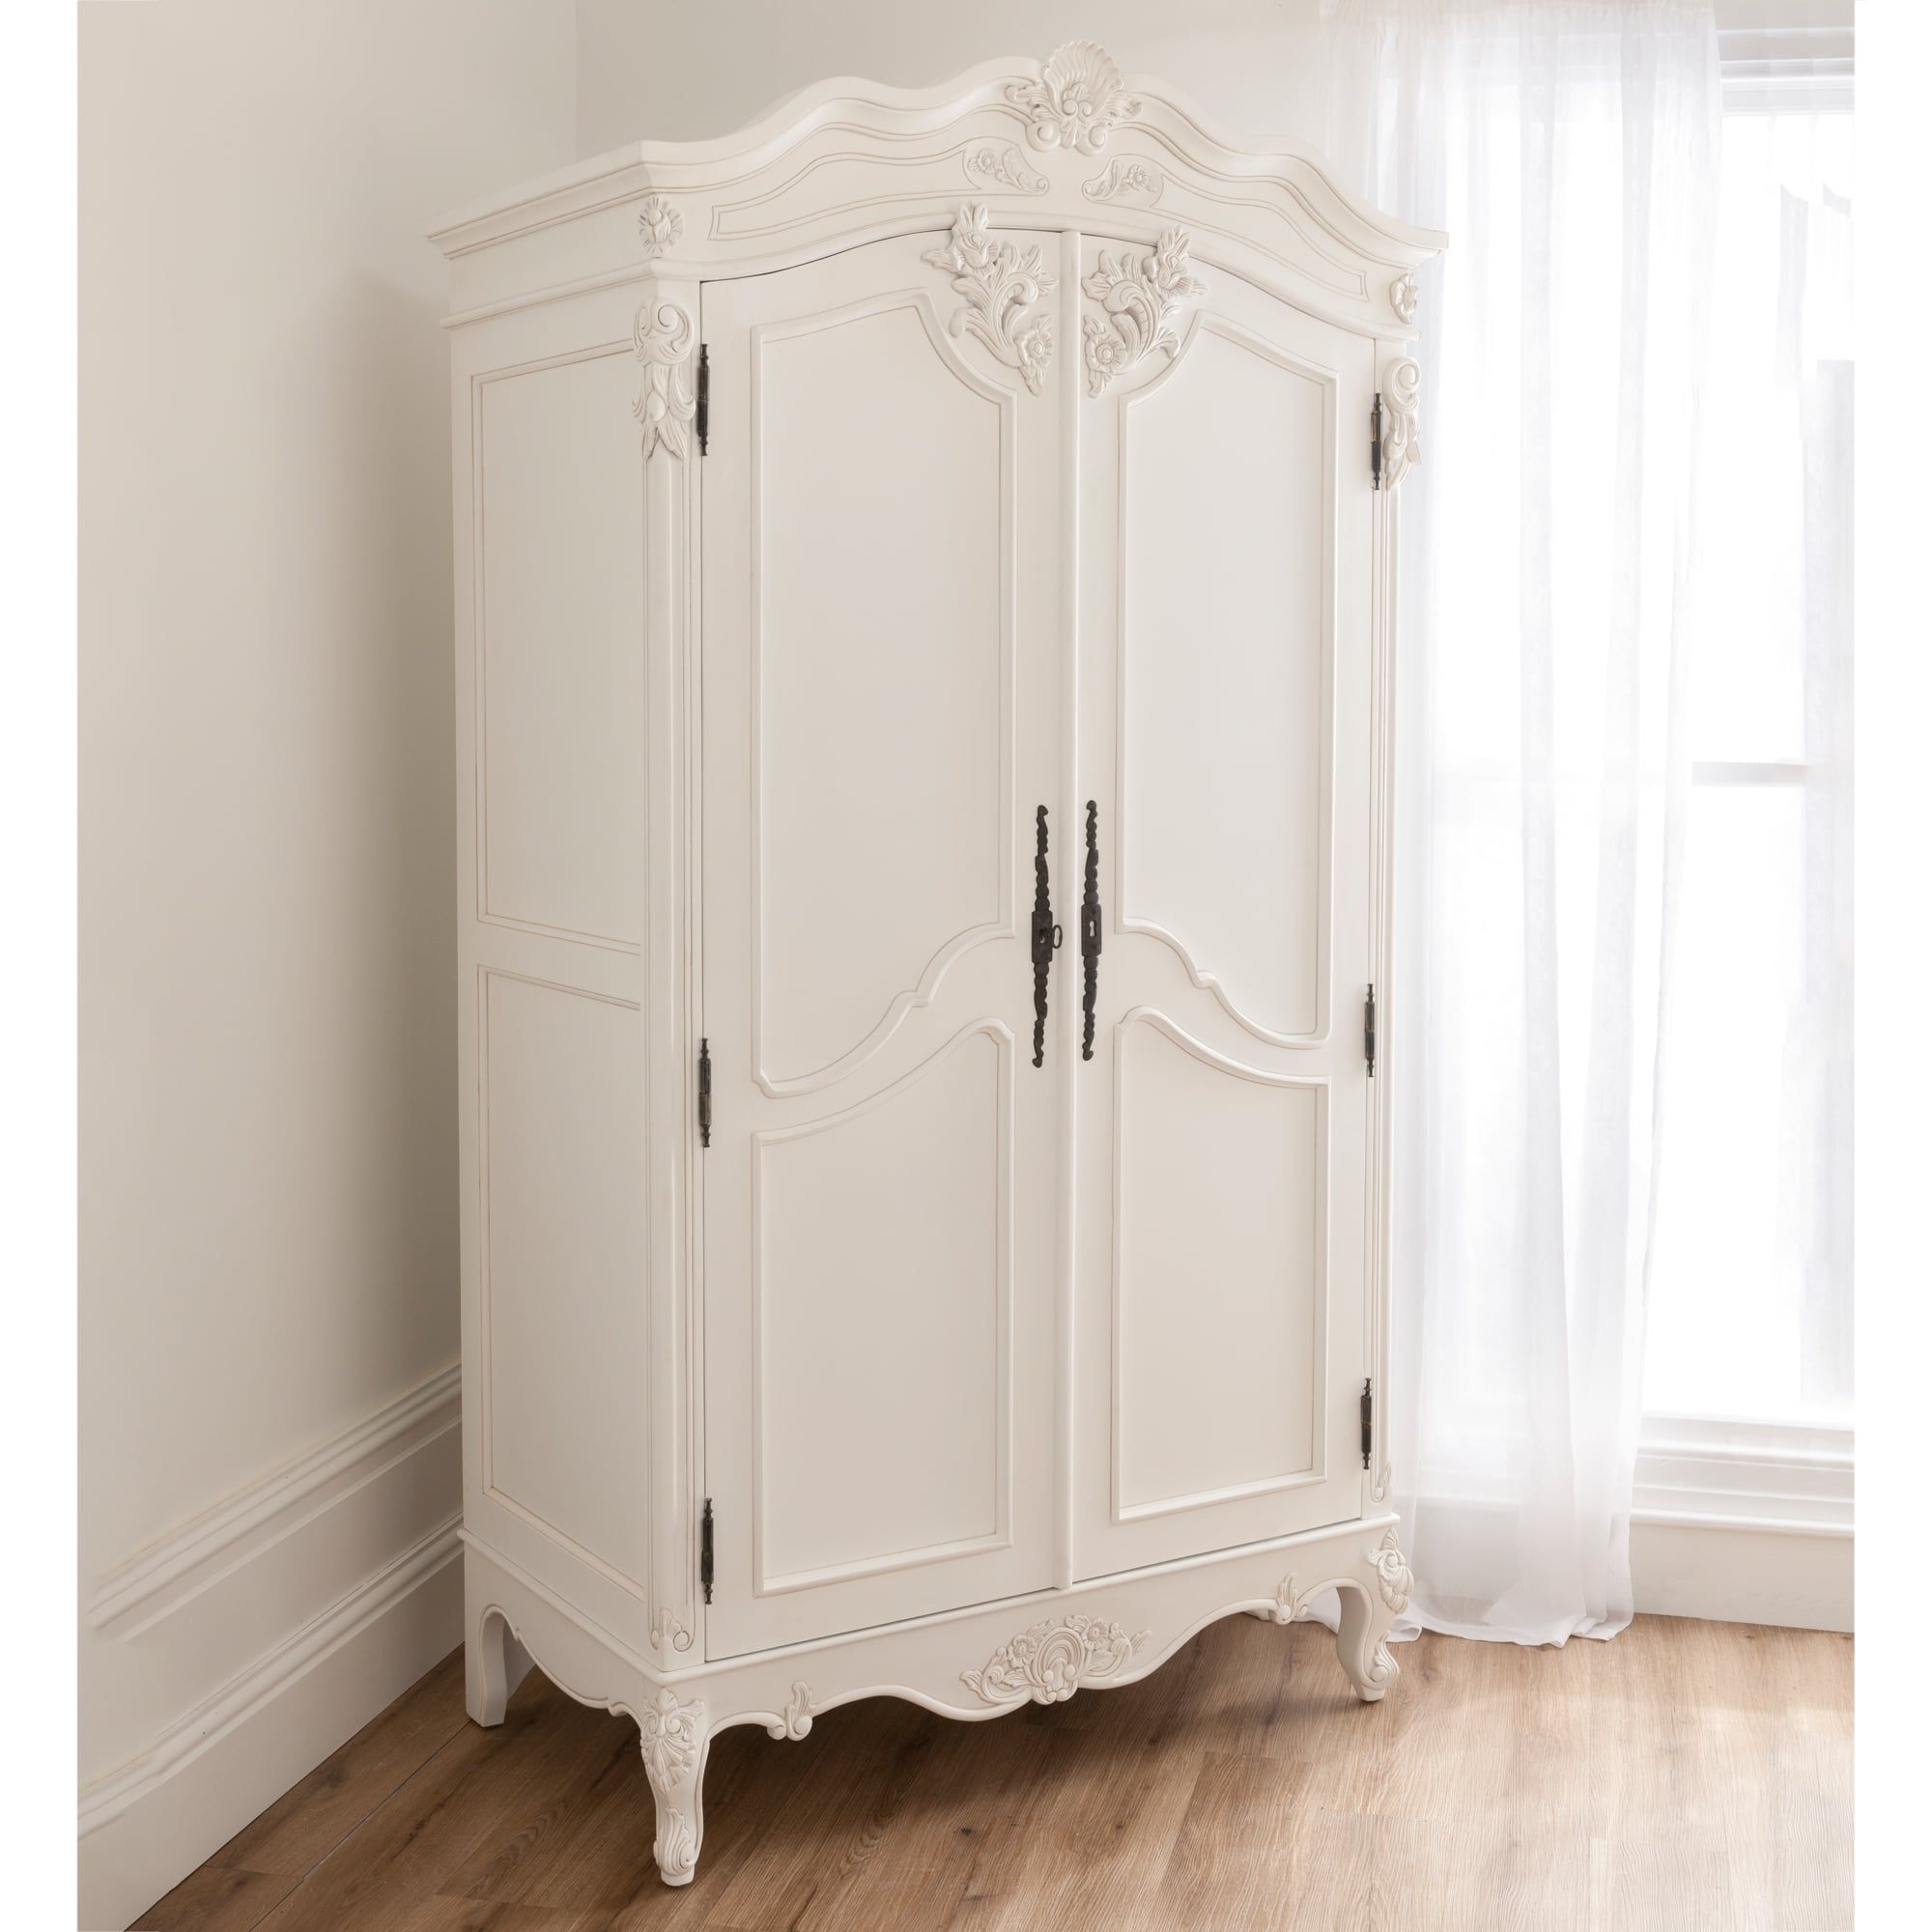 Baroque Antique French Wardrobe Is Available Online At Homesdirect365 Within French White Wardrobes (View 3 of 20)